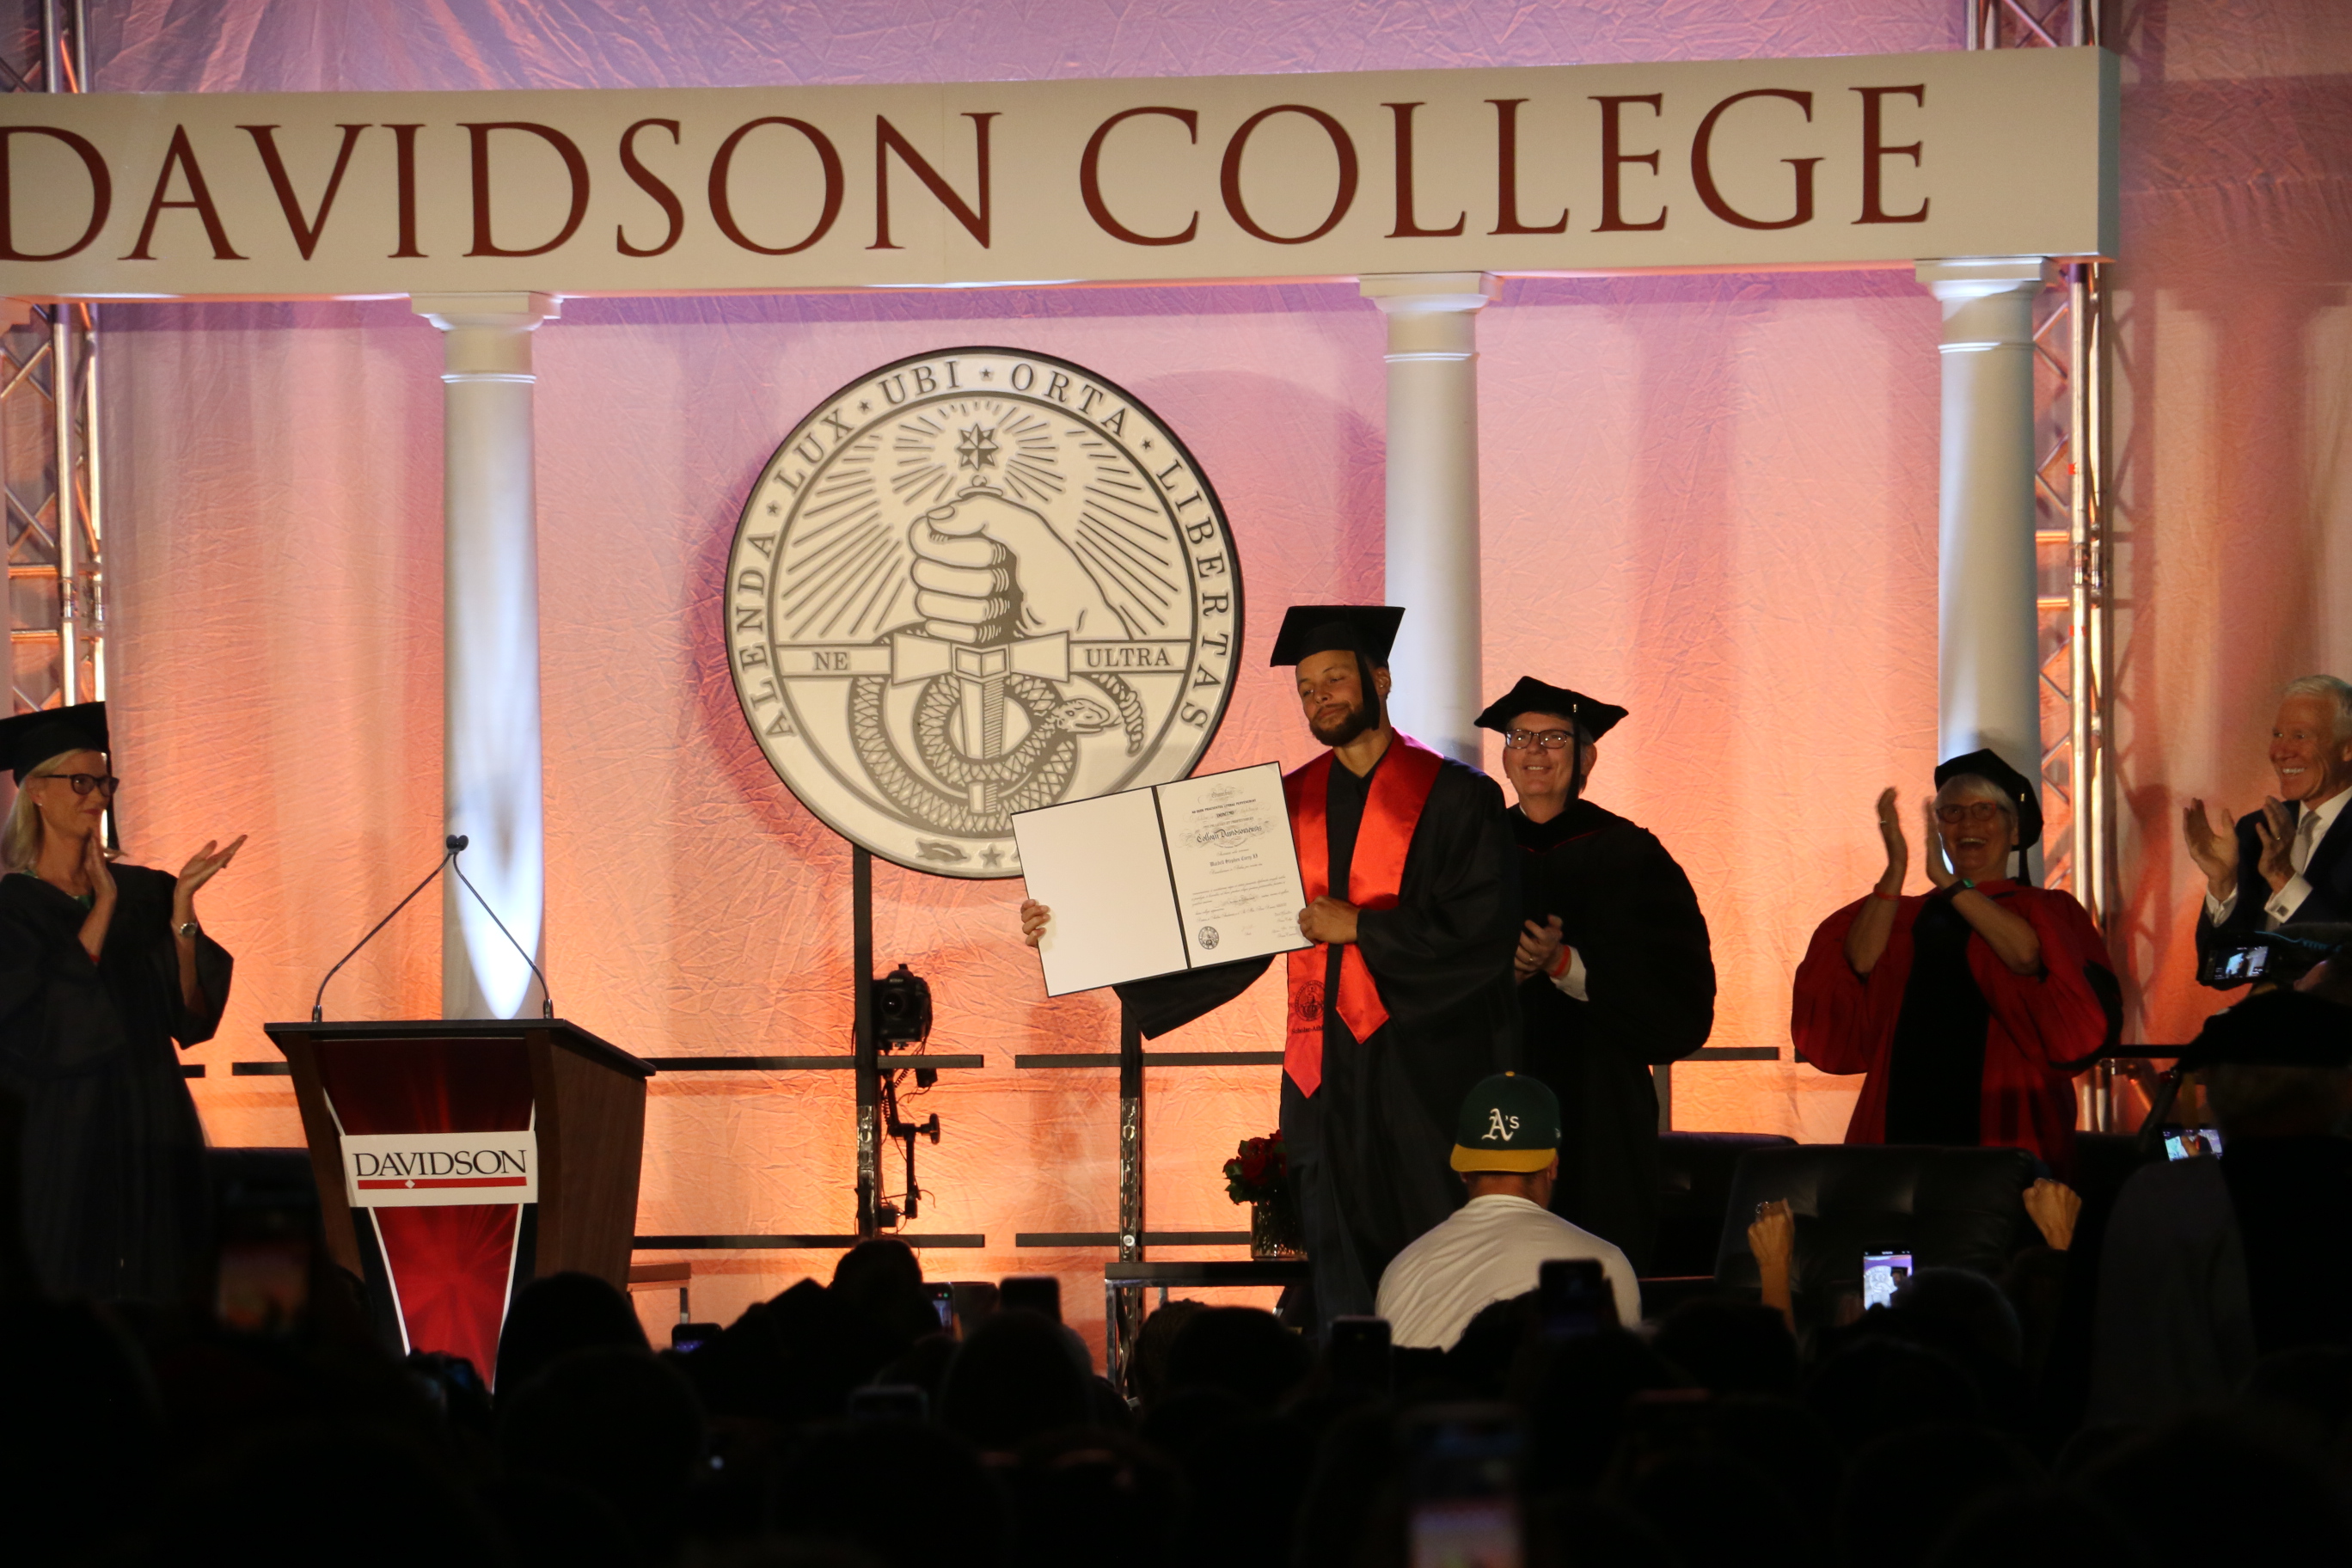 Stephen Curry honored Davidson's tradition and his commitment with  graduation